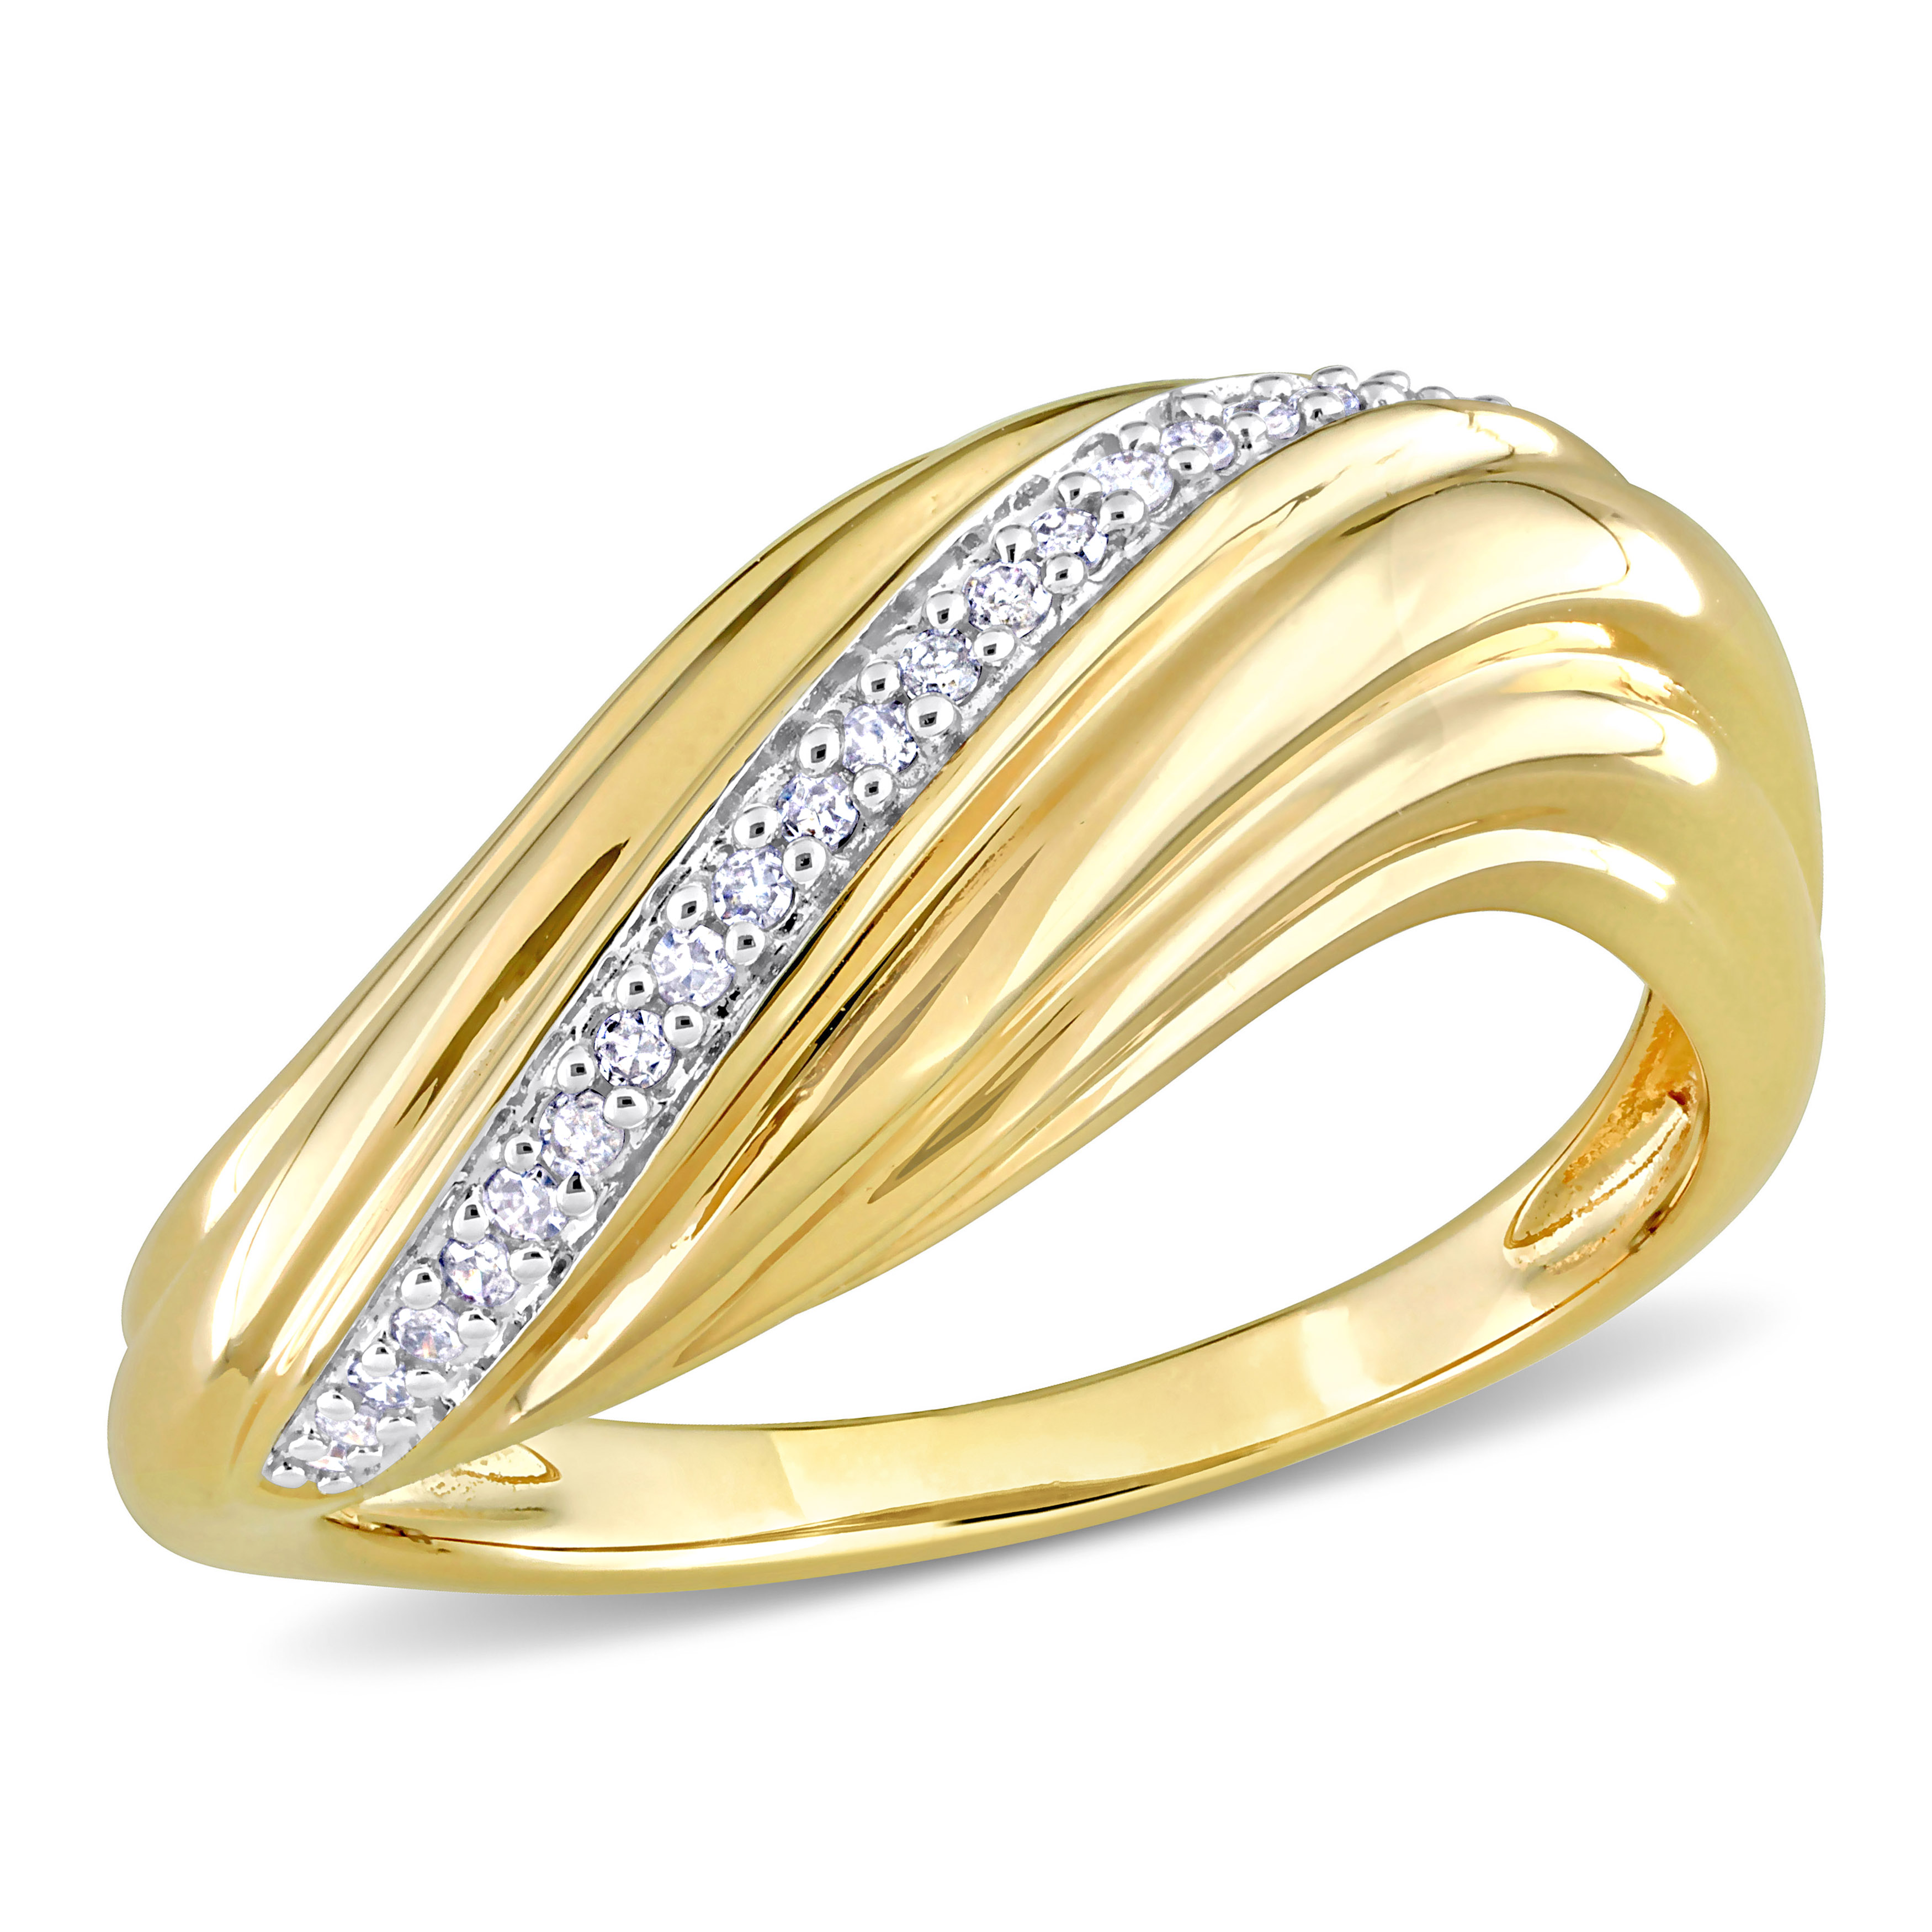 1/10 CT TDW Diamond Curved Wave Ring in 14k Yellow Gold